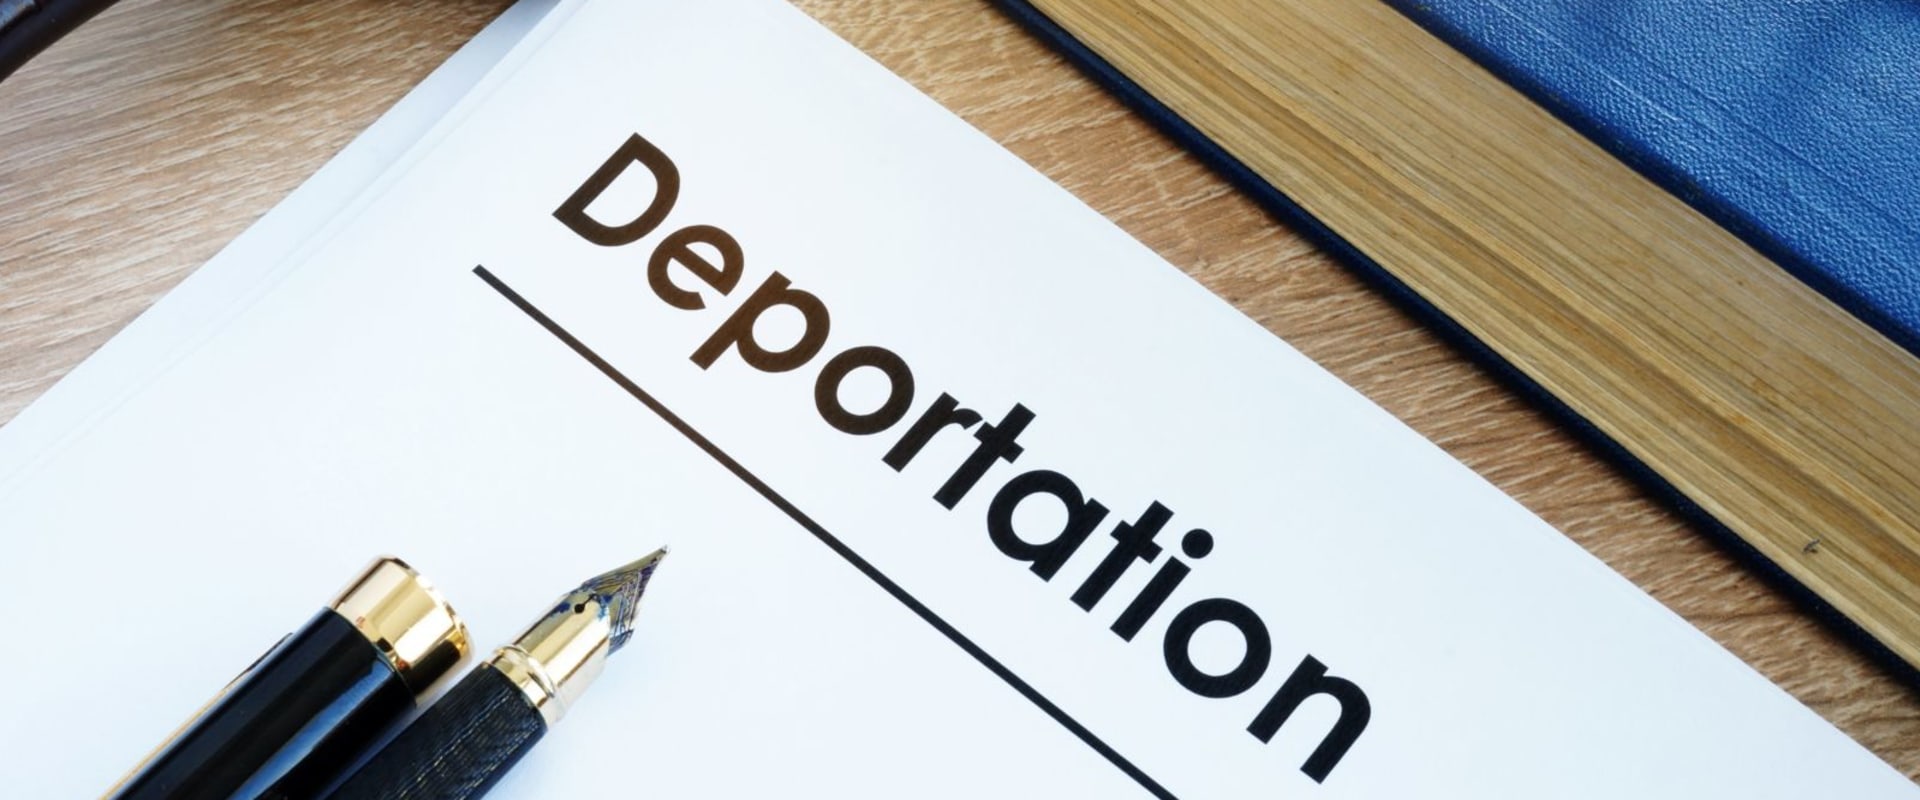 How do you fight a deportation order?